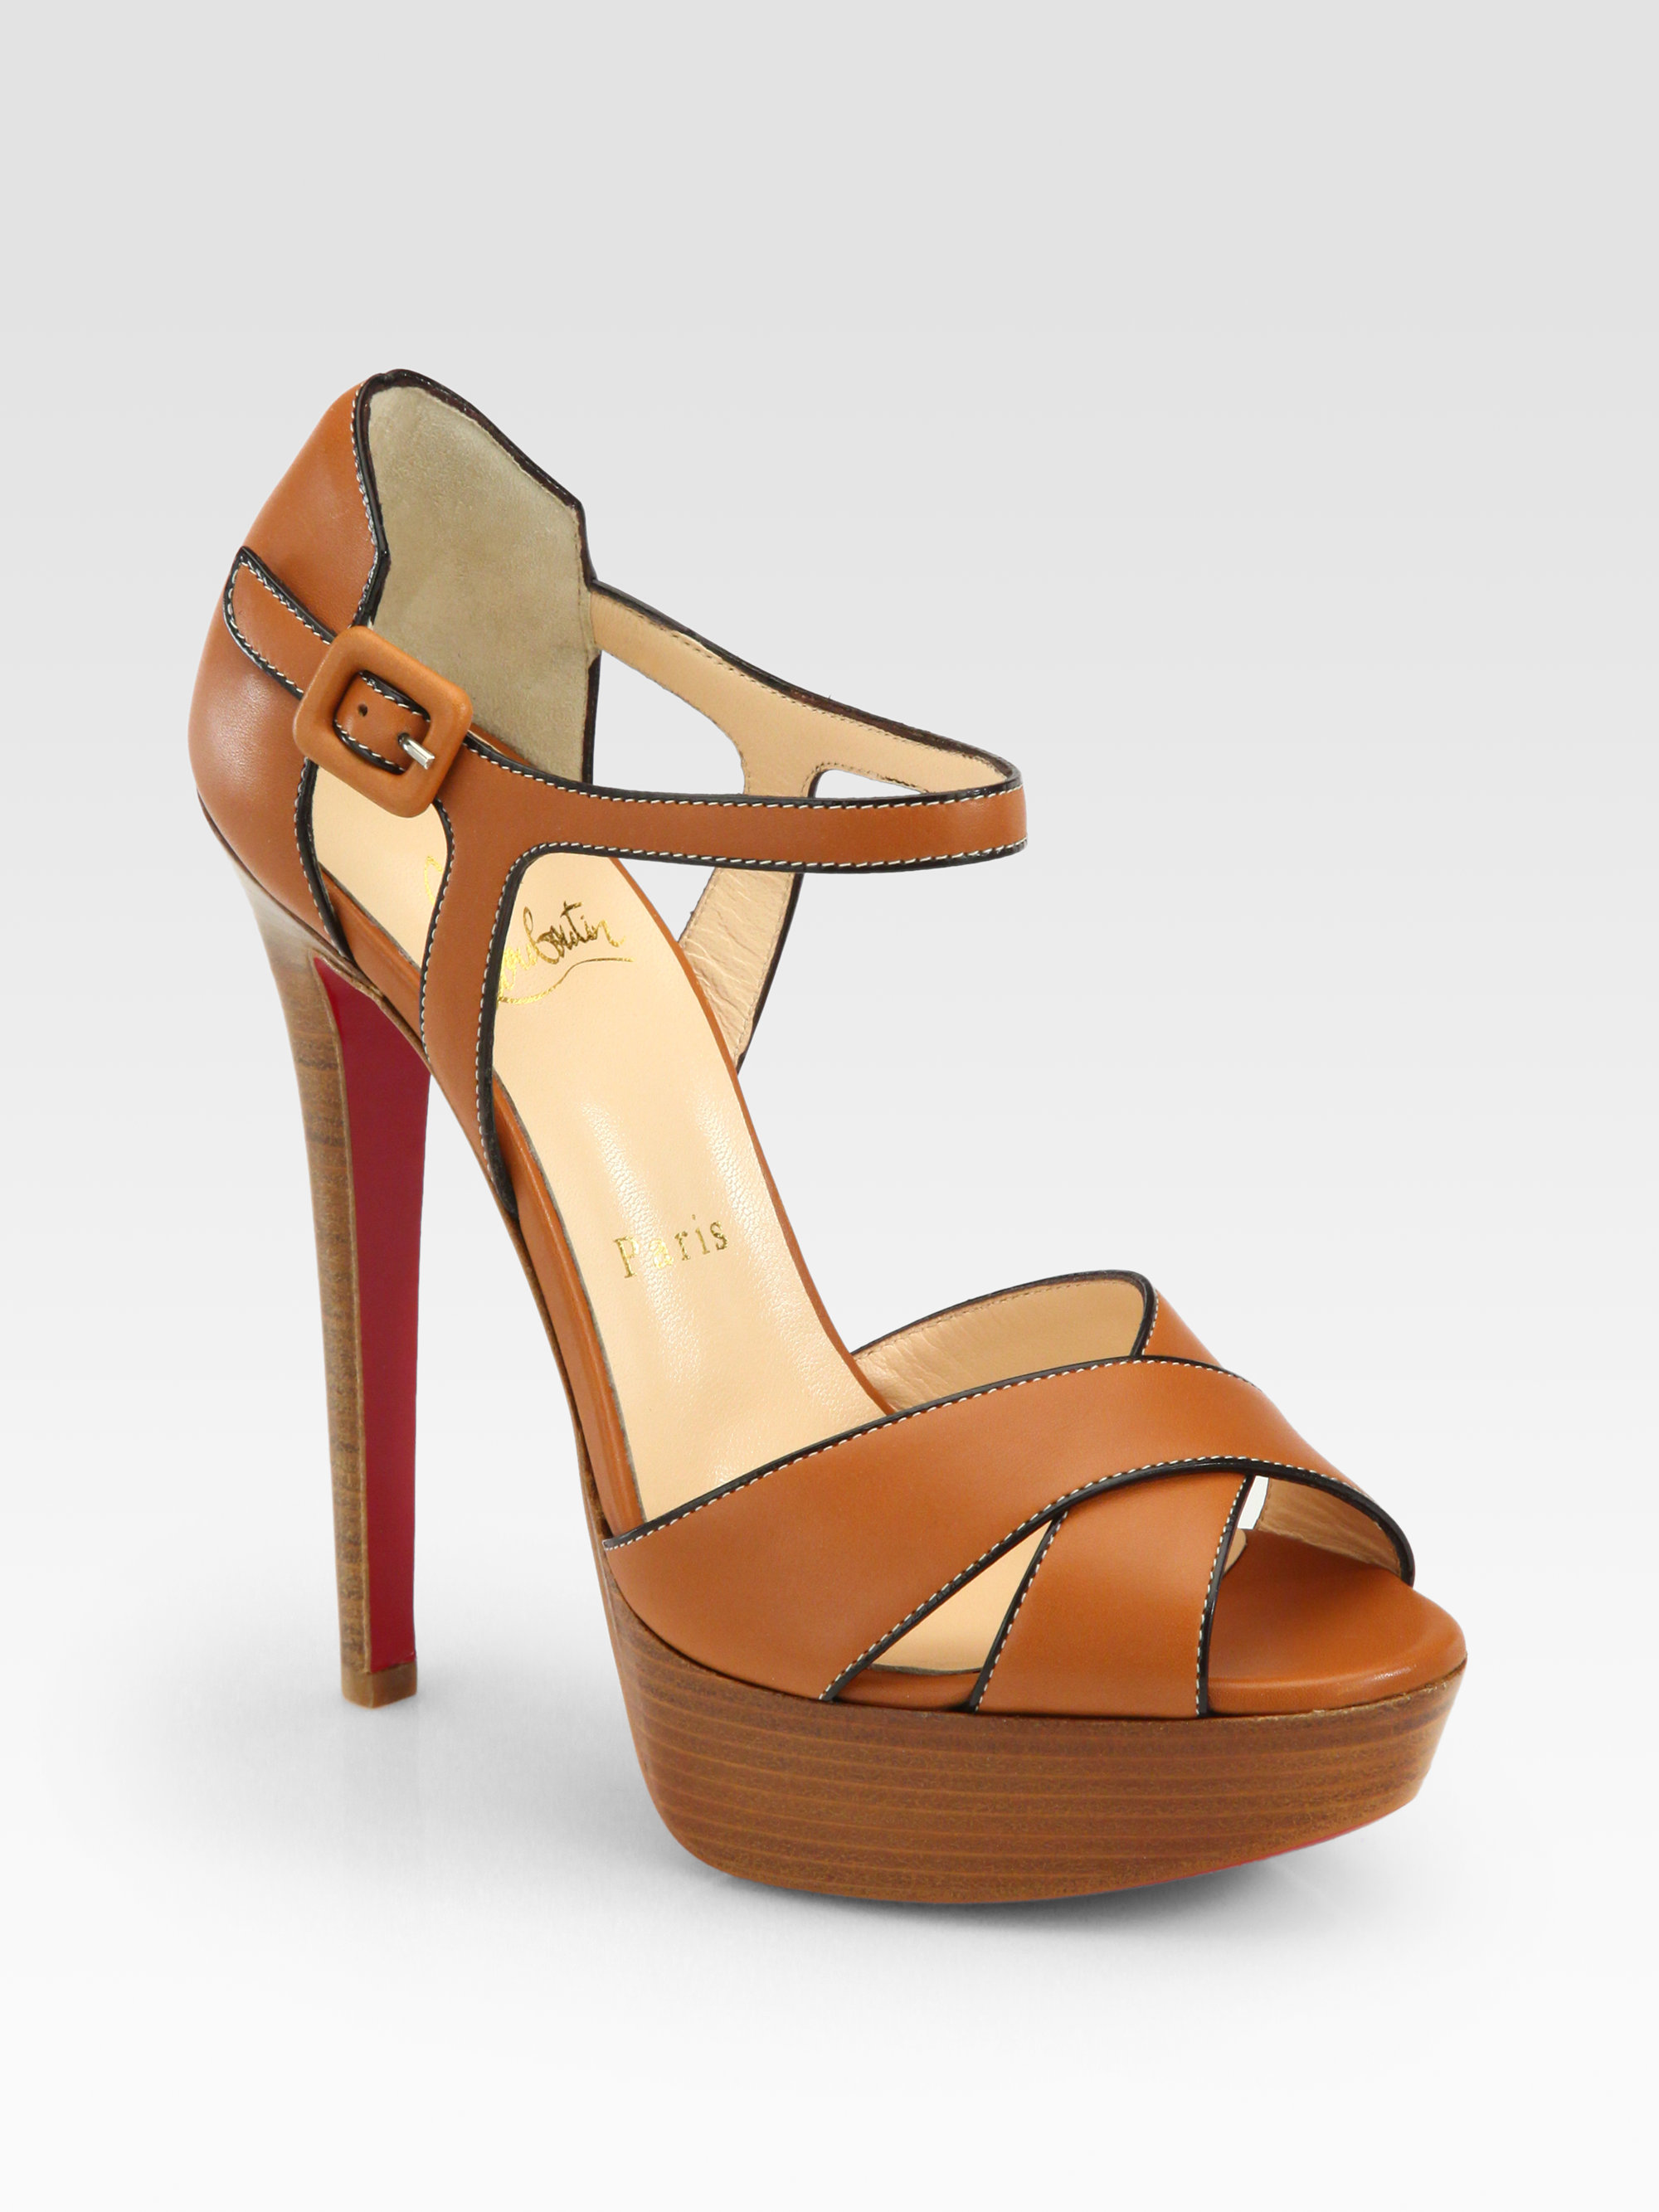 Christian Louboutin Sporting Leather Platform Sandals in Brown |